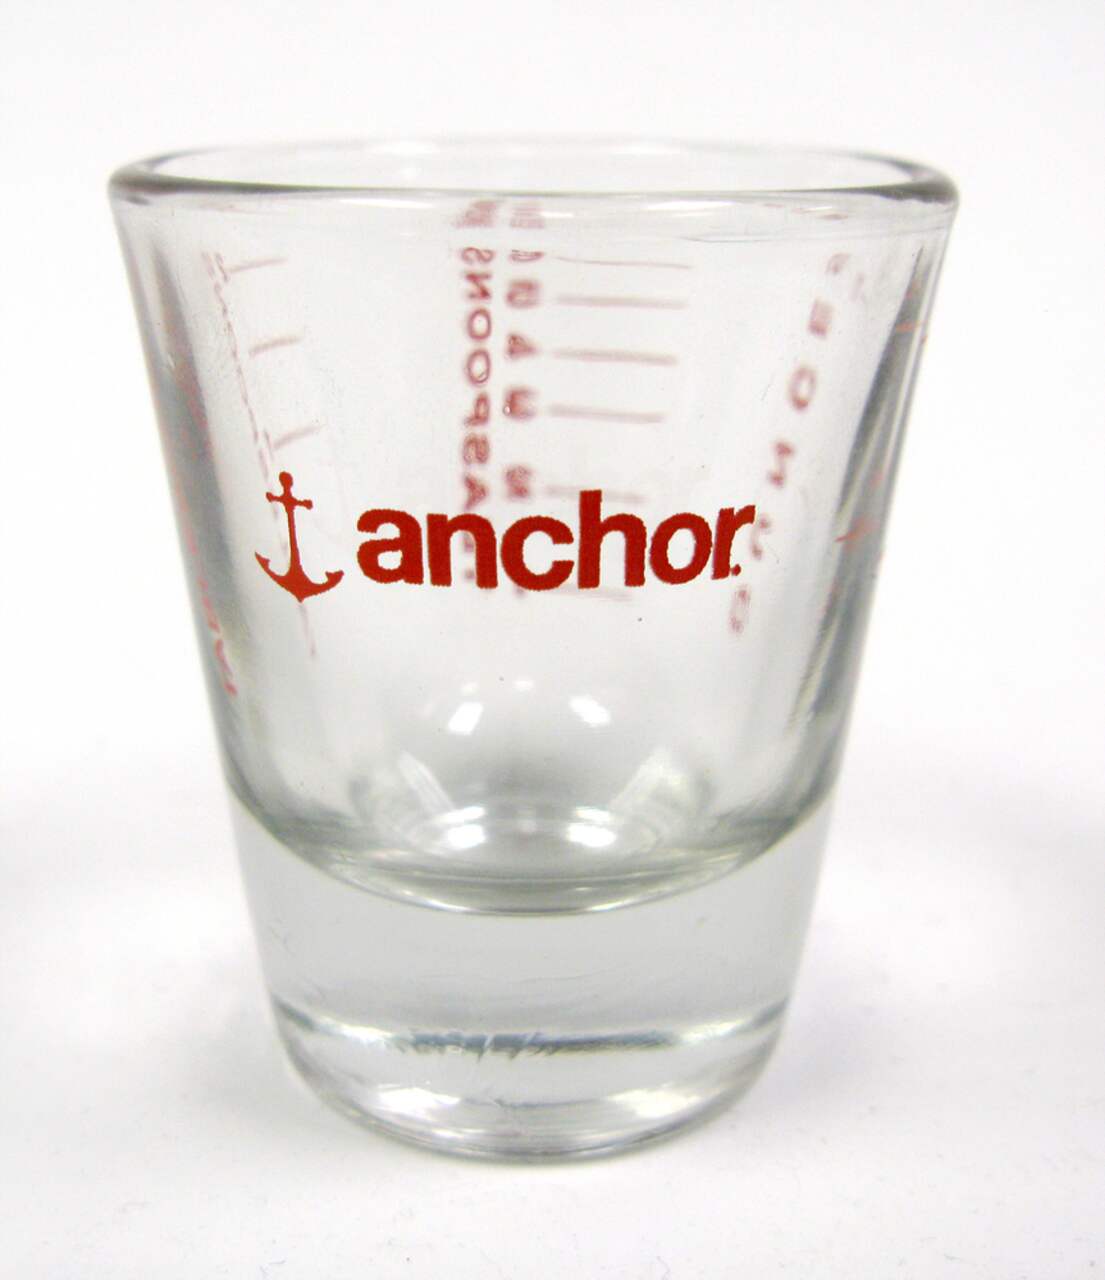 Measuring Cup 6 oz. $1.99 - Spa and Pool store